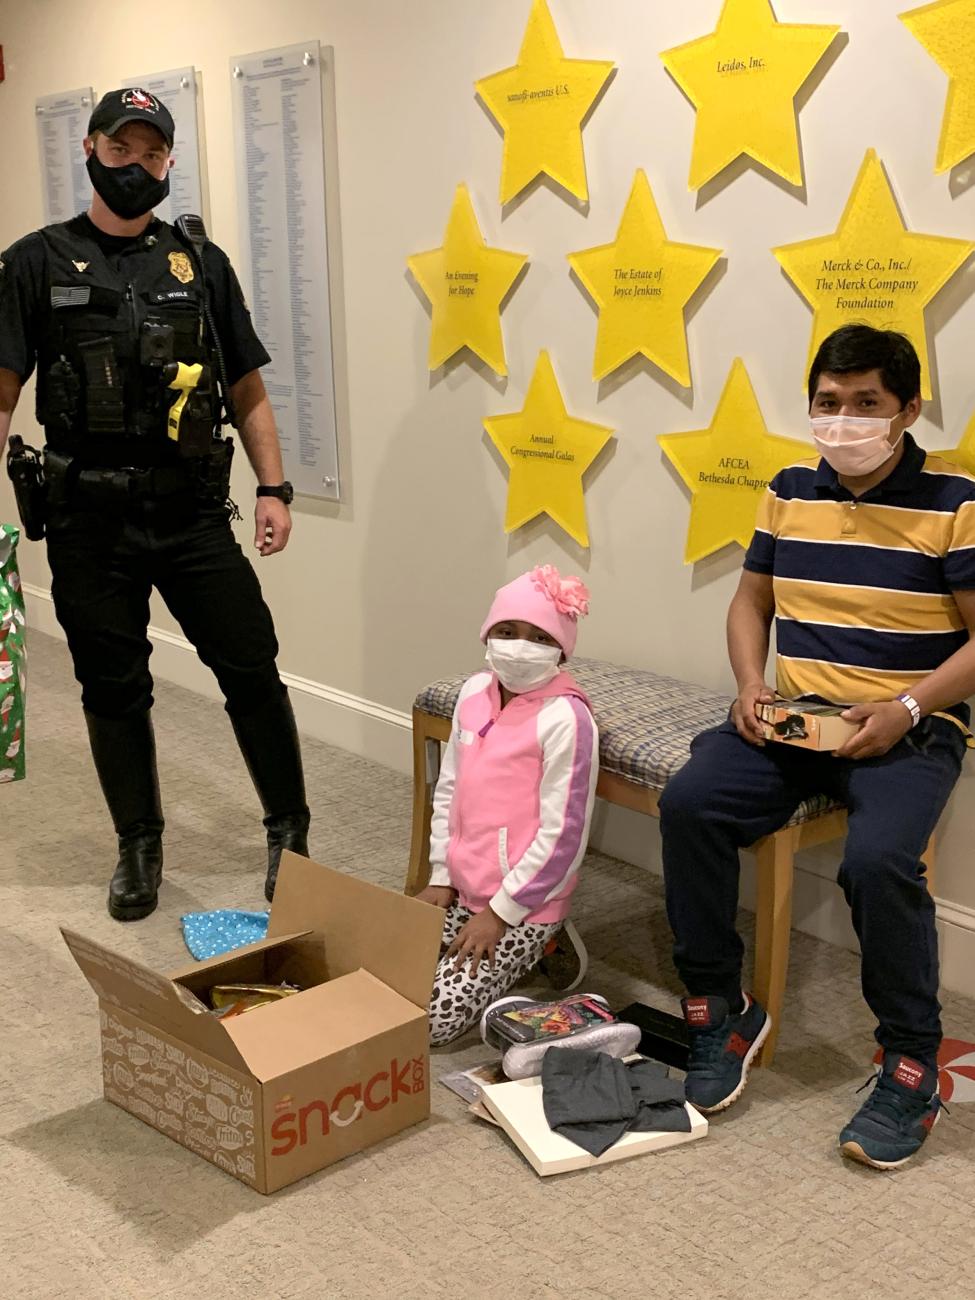 Police officer watches a young patient open presents